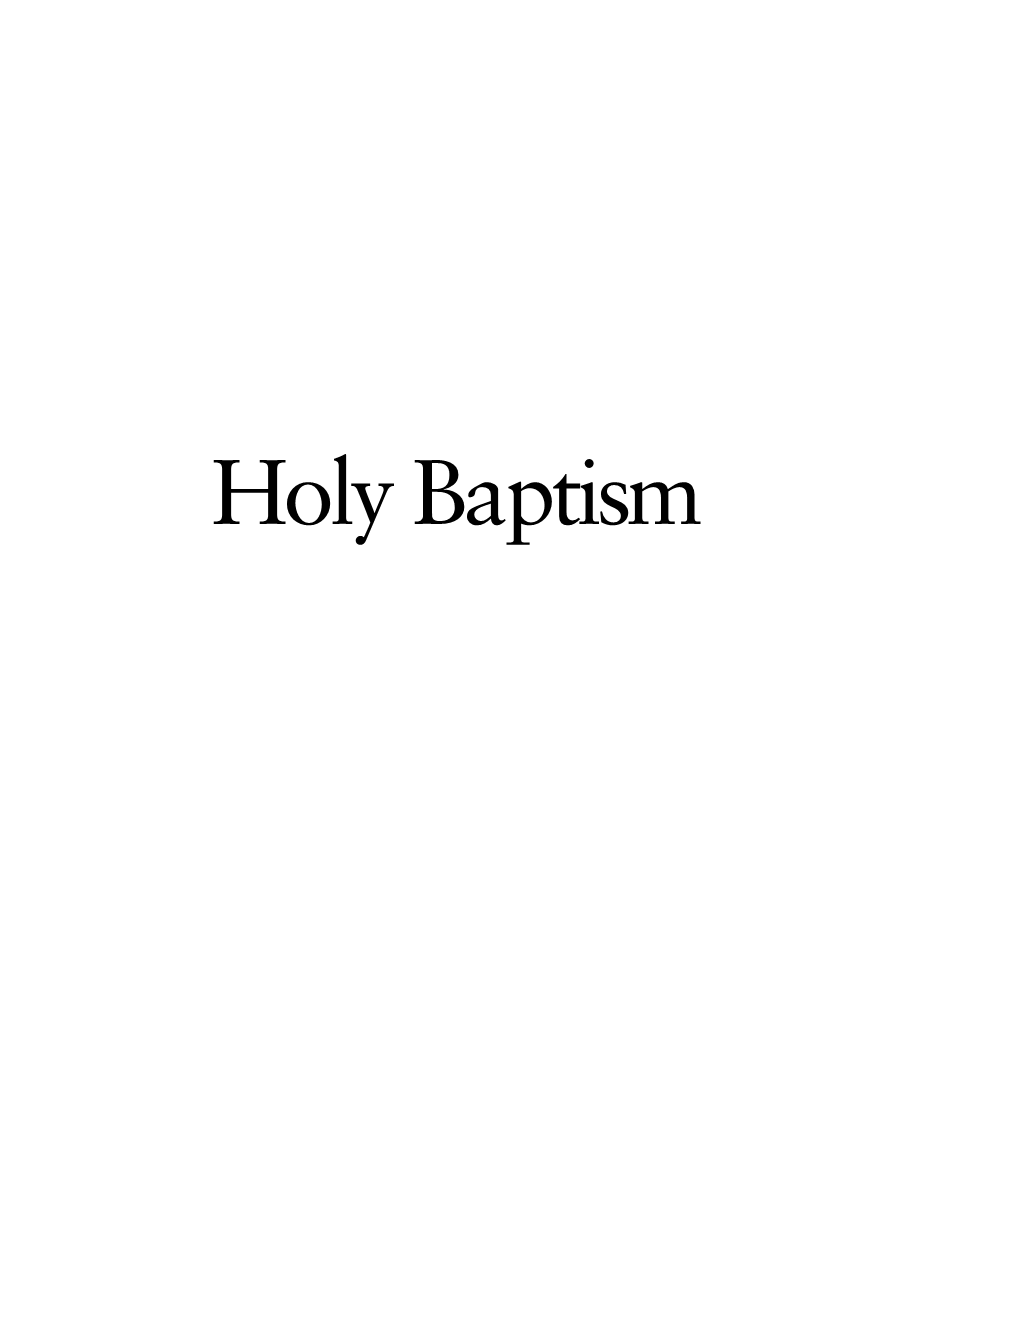 Baptismal Service from the Book of Common Prayer